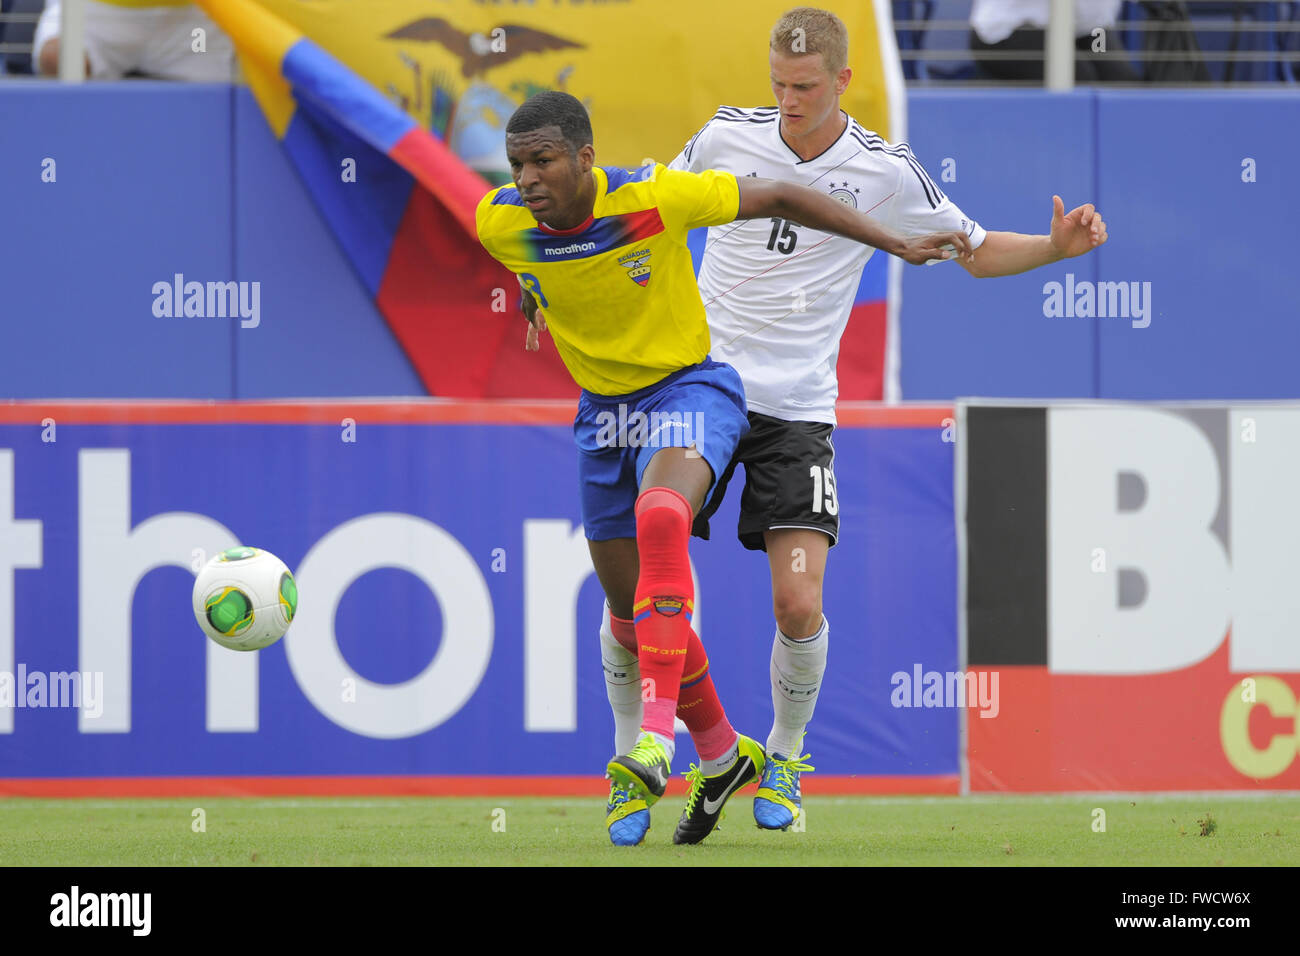 Boca Raton, FL, USA. 29th May, 2013. Germany midfielder Lars Bender (15) and Ecuador's Frickson Erazo for a ball during an international friendly at FAU Stadium in Boca Raton, Florida on May 29, 2013. Germany won 4-2.ZUMA PRESS/Scott A. Miller © Scott A. Miller/ZUMA Wire/Alamy Live News Stock Photo